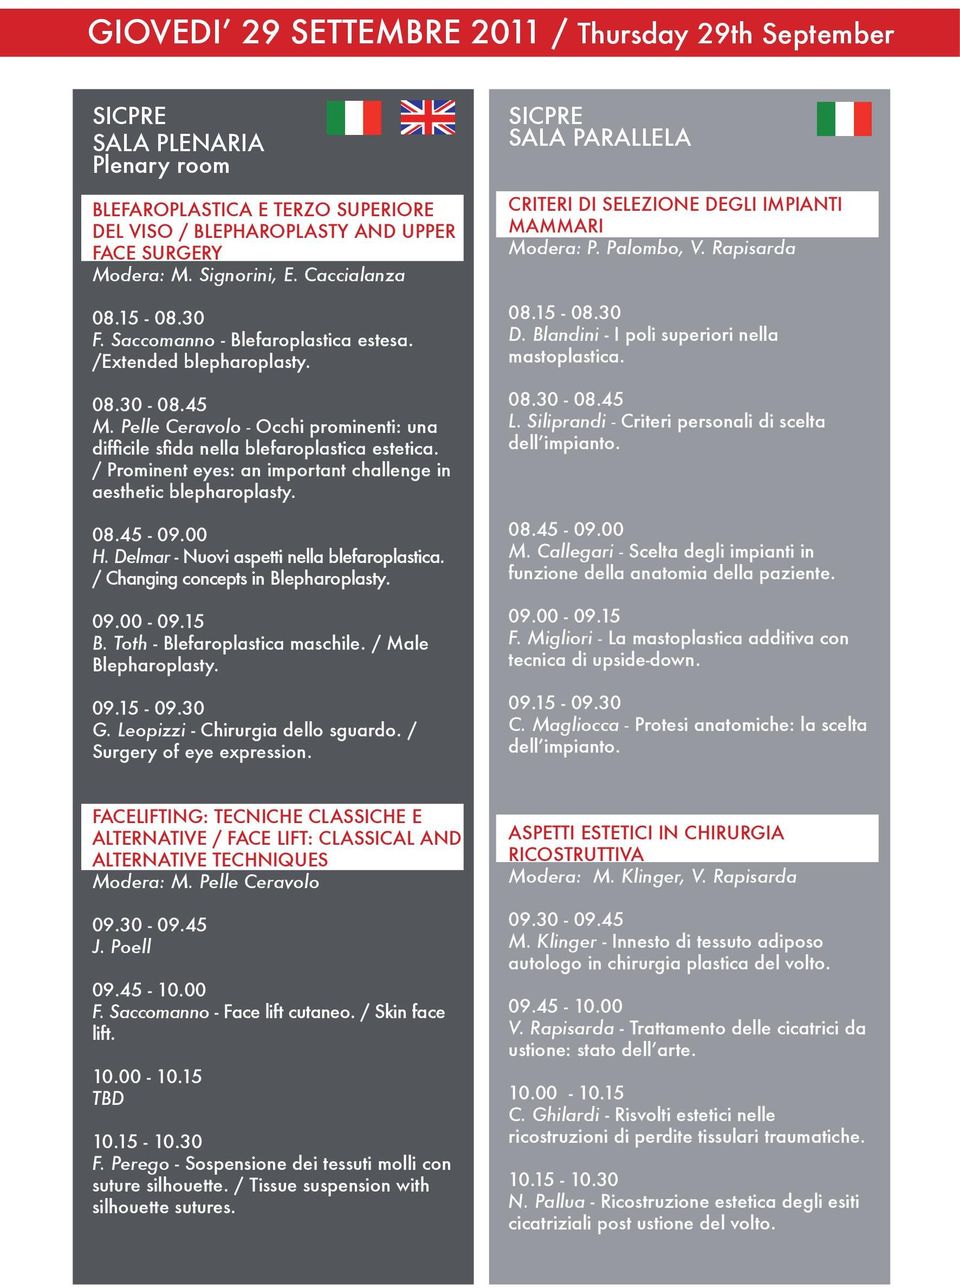 / Prominent eyes: an important challenge in aesthetic blepharoplasty. 08.45-09.00 H. Delmar - Nuovi aspetti nella blefaroplastica. / Changing concepts in Blepharoplasty. 09.00-09.15 B.